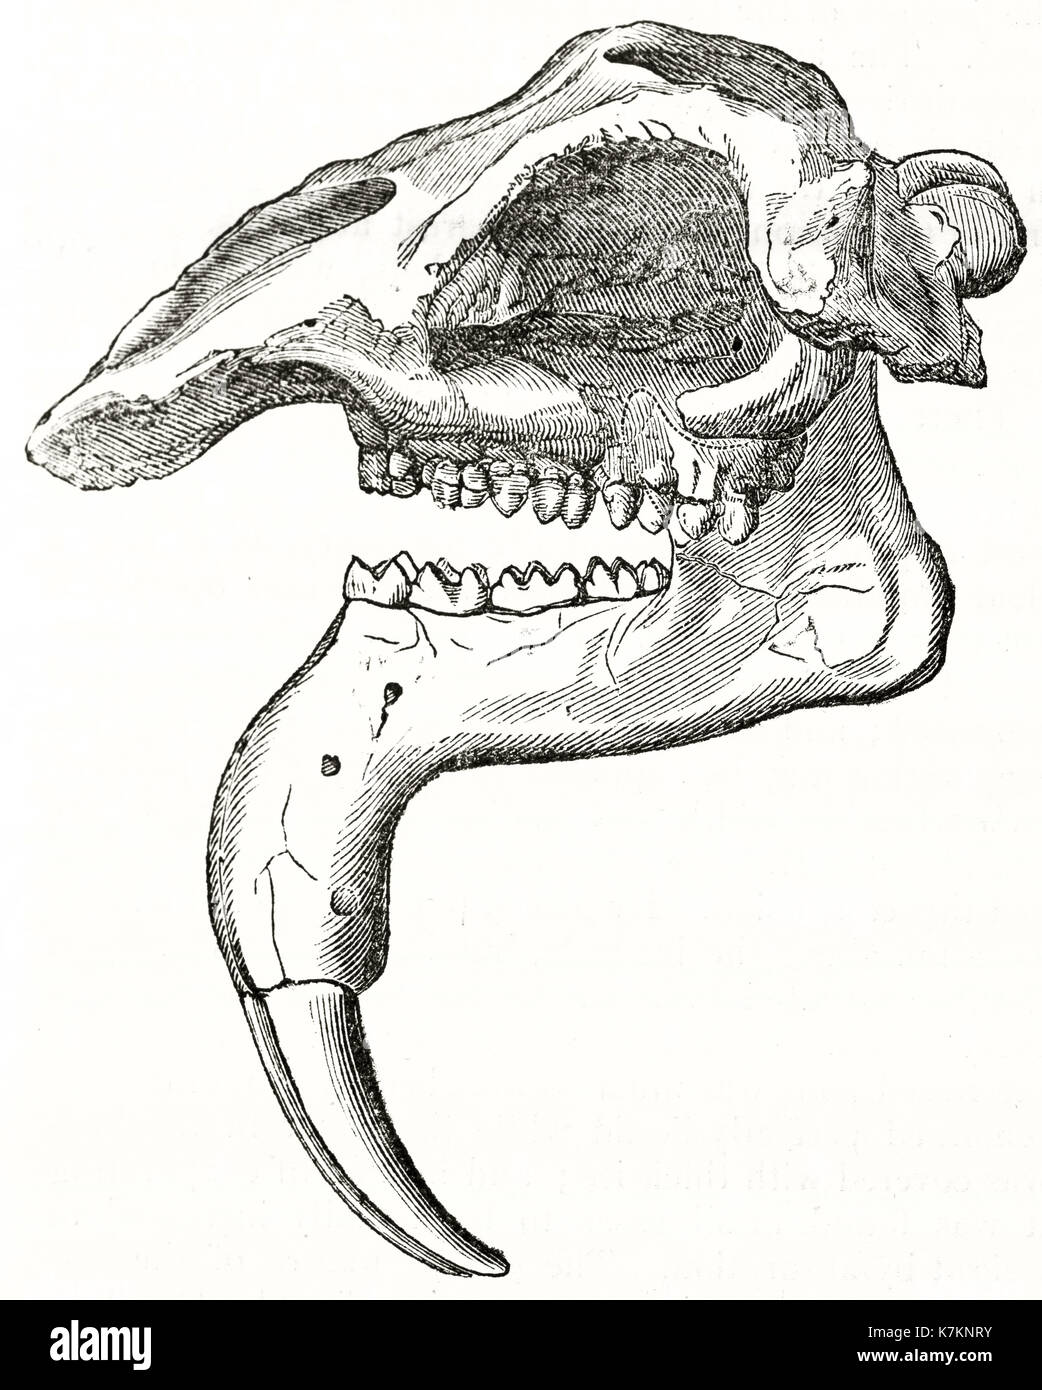 Old illustration of a Deinotherium skull. By unidentified author, publ. on The Penny Magazine, London, 1837 Stock Photo